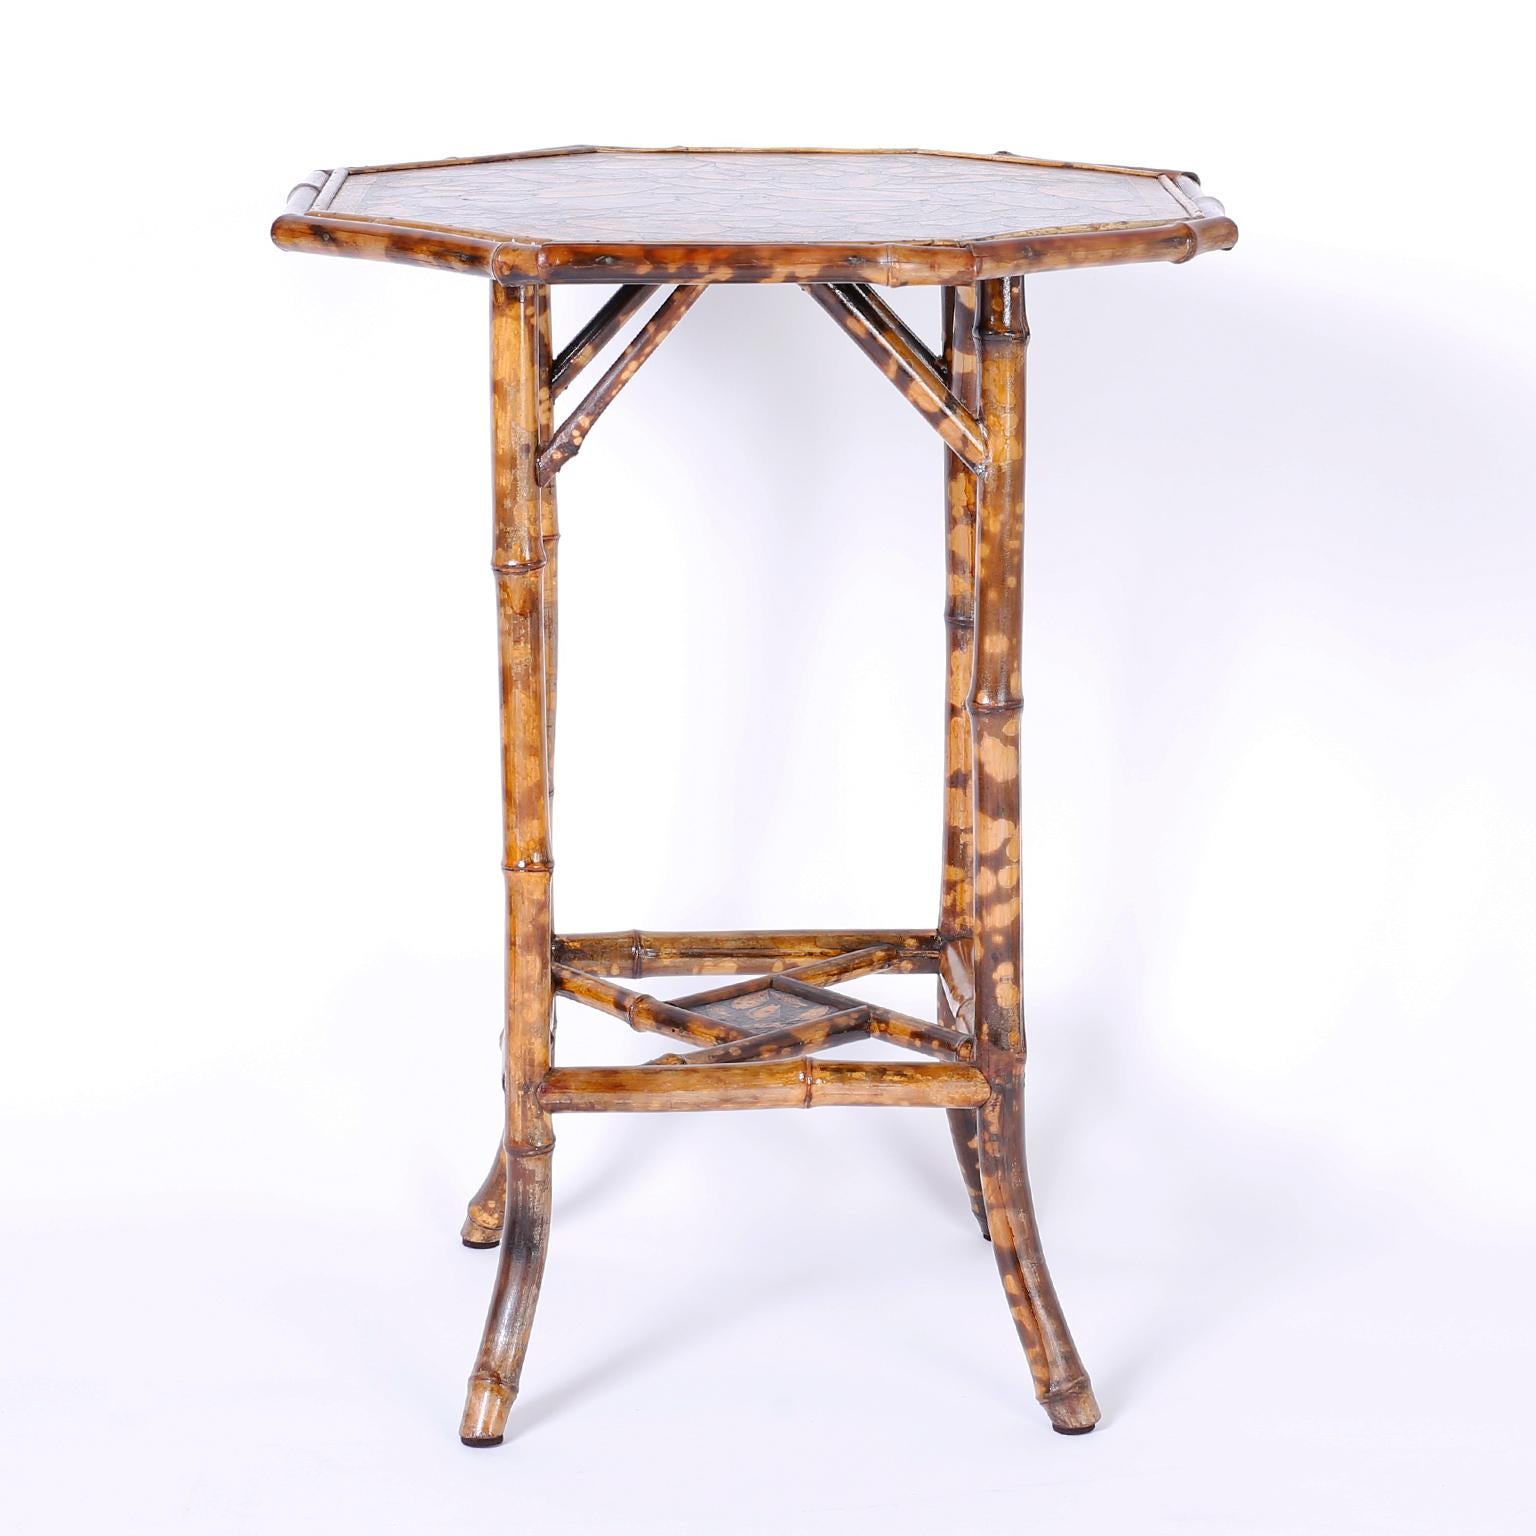 Victorian Antique English Bamboo Table with Seashell Decoupage